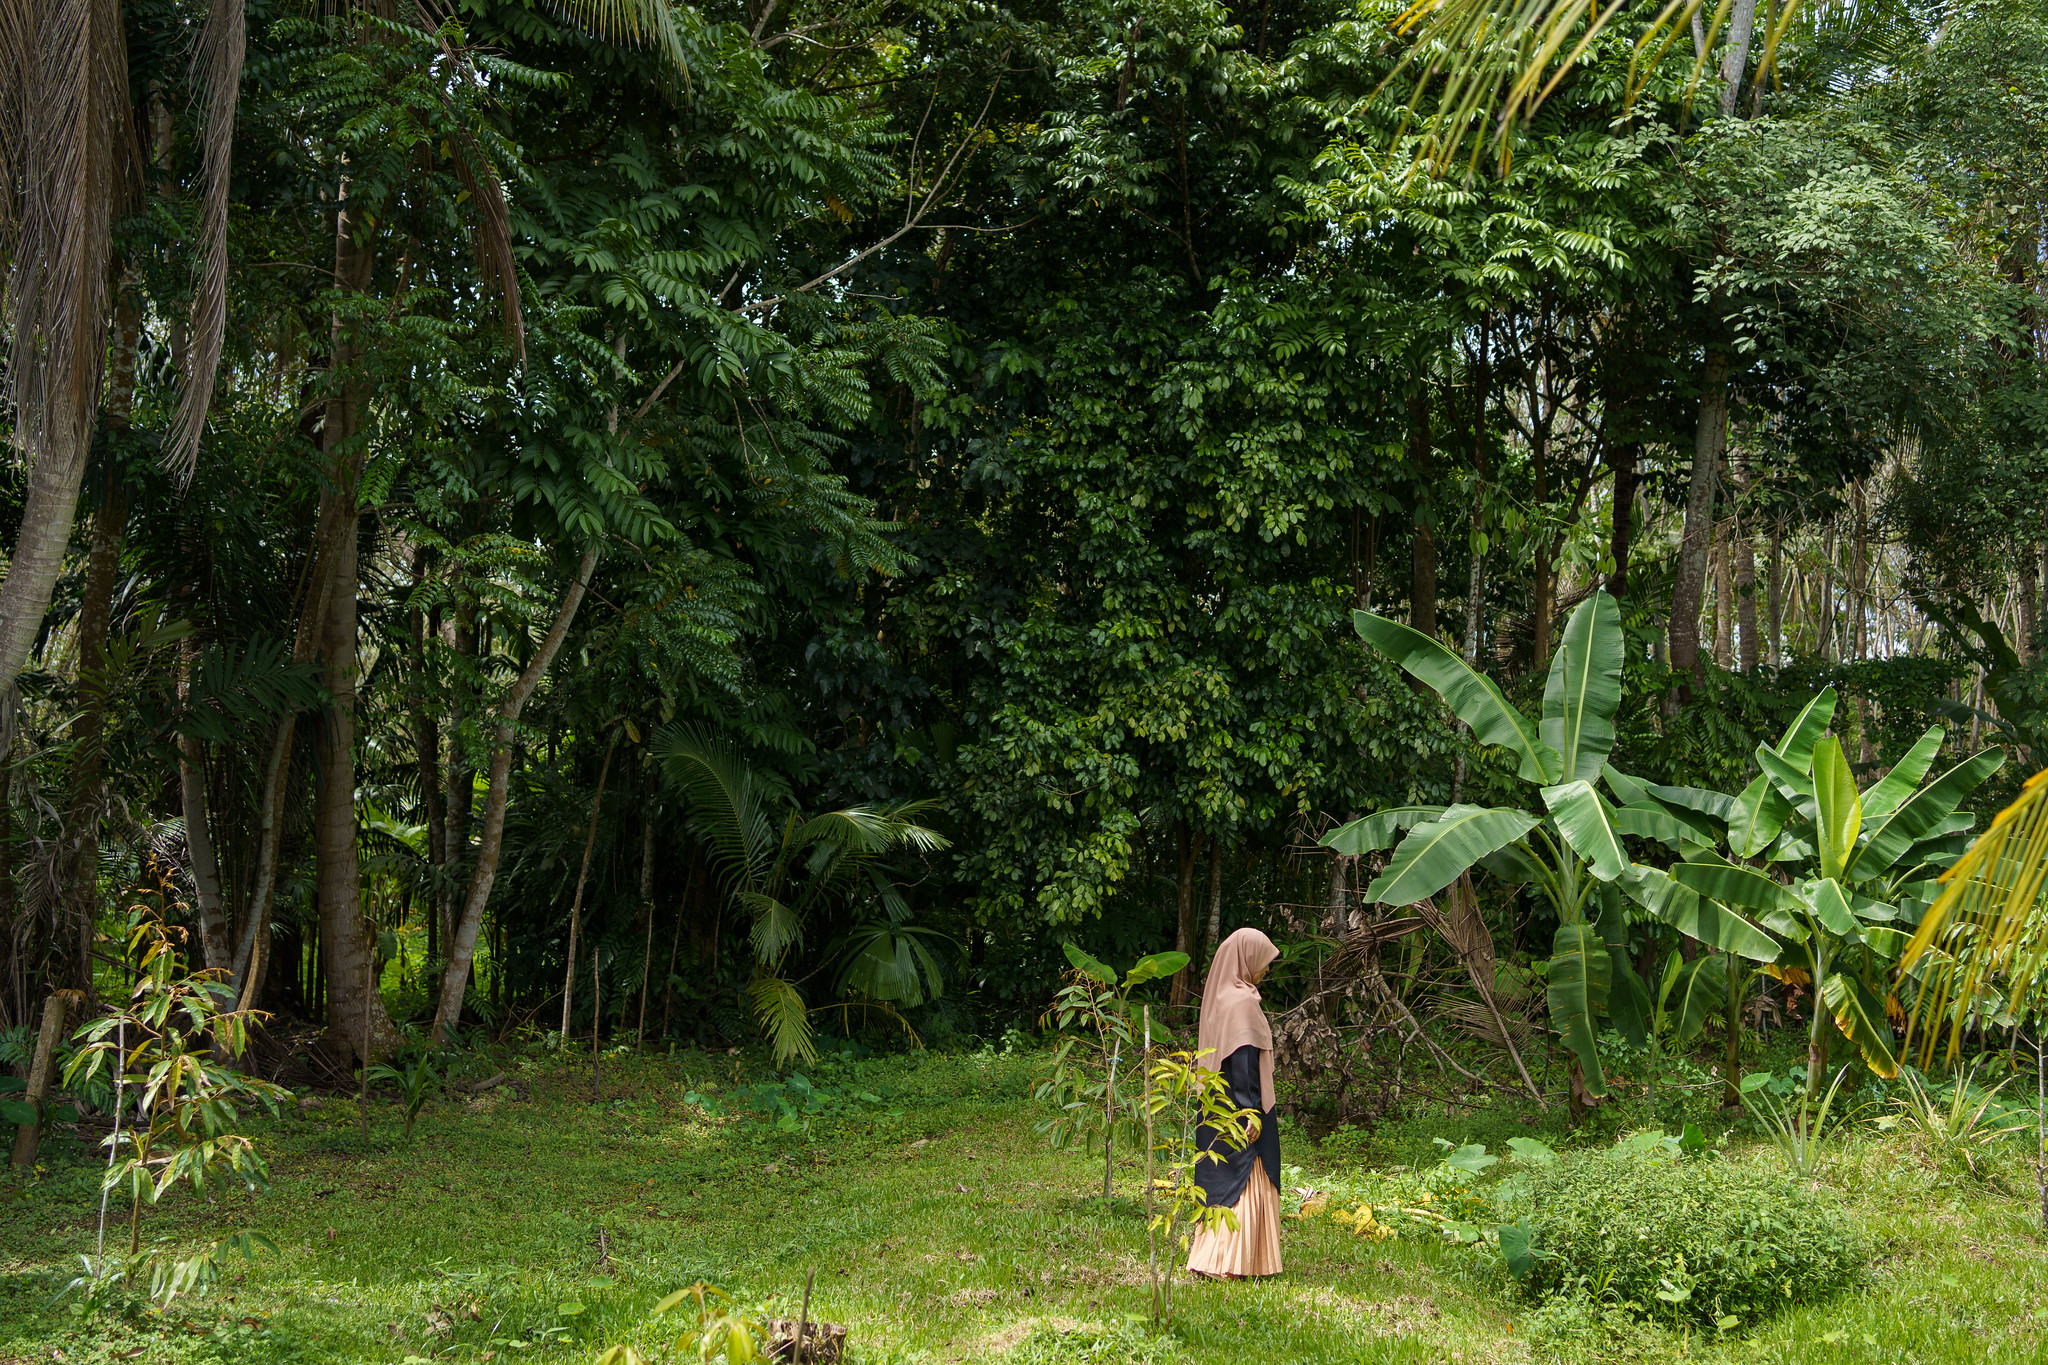 Mae Lan district, Pattani (Thailand). A villager walks through her garden. As part of a larger relief fund, the community is planting plants for future self-sustainability in case of a future pandemic and further restrictions.